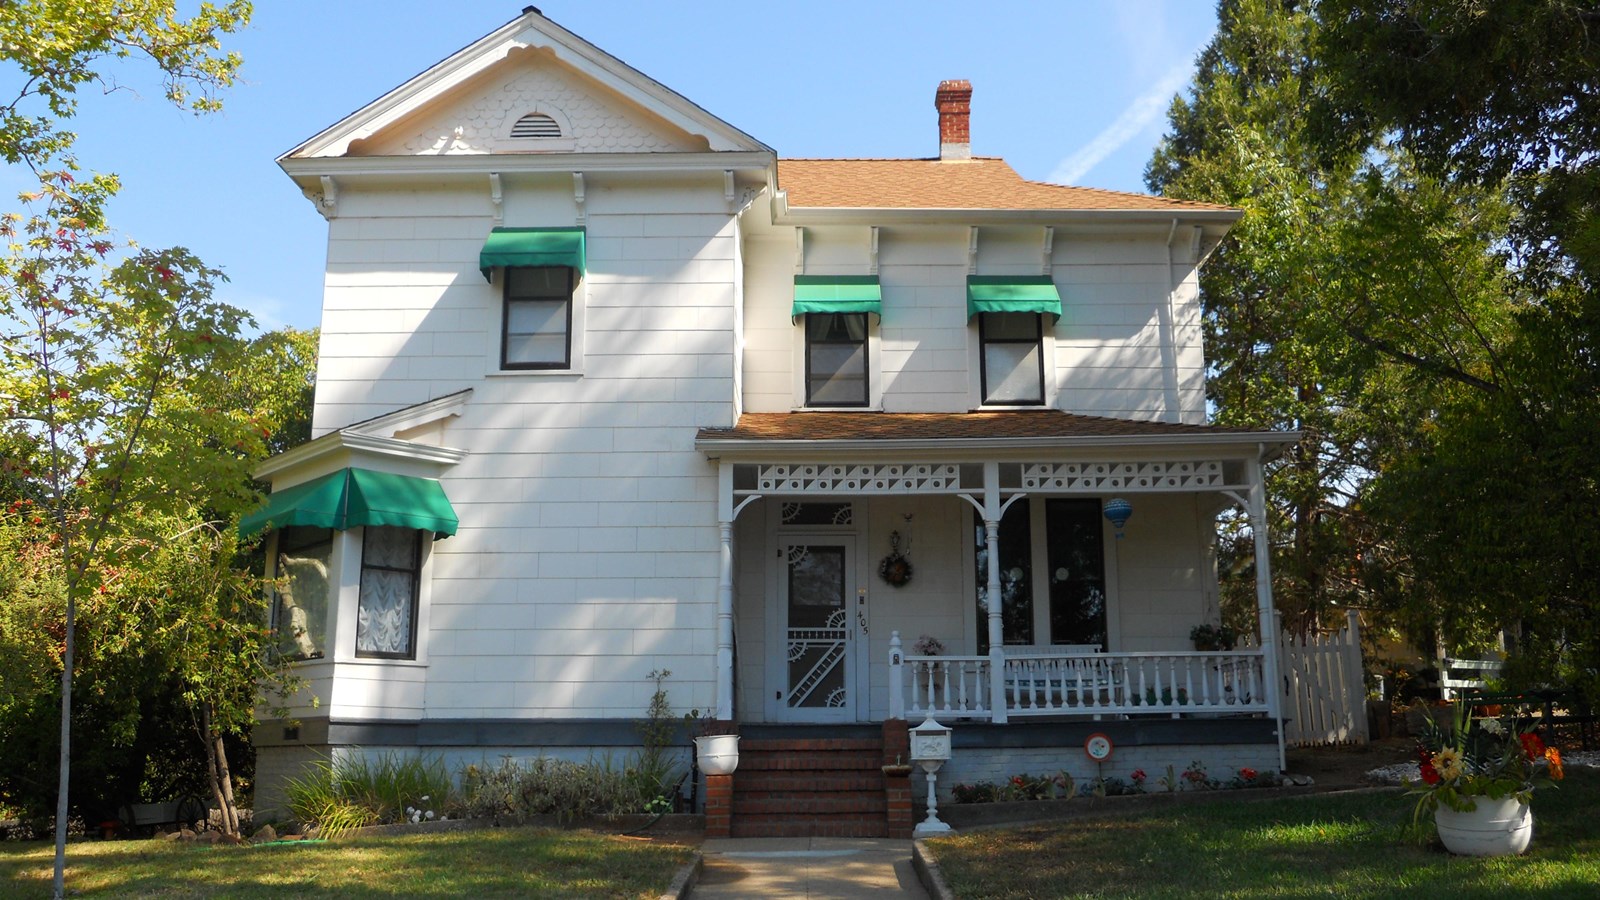 White two story house with green awnings over the windows